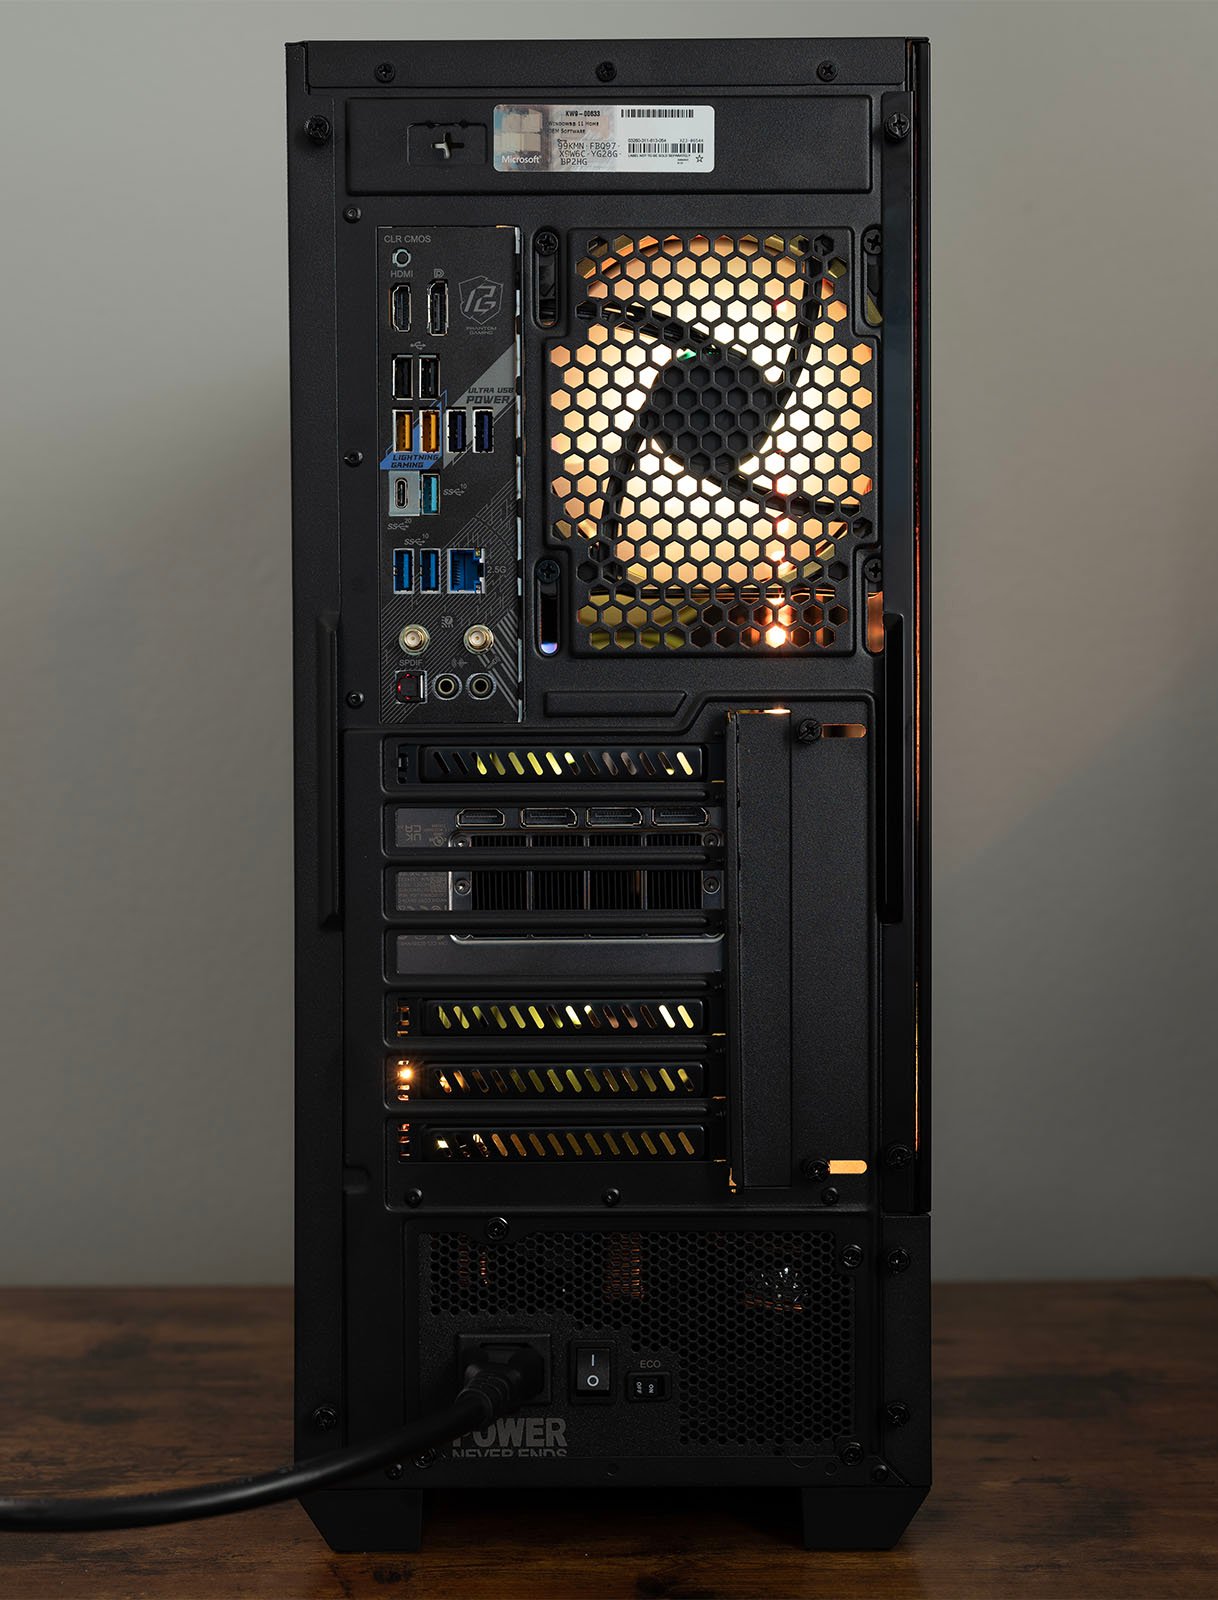 The image shows the rear view of a desktop computer tower featuring various ports including USB, Ethernet, HDMI, and audio jacks. A cooling fan is visible through the mesh panel, and the power supply is connected to the power cord at the bottom.